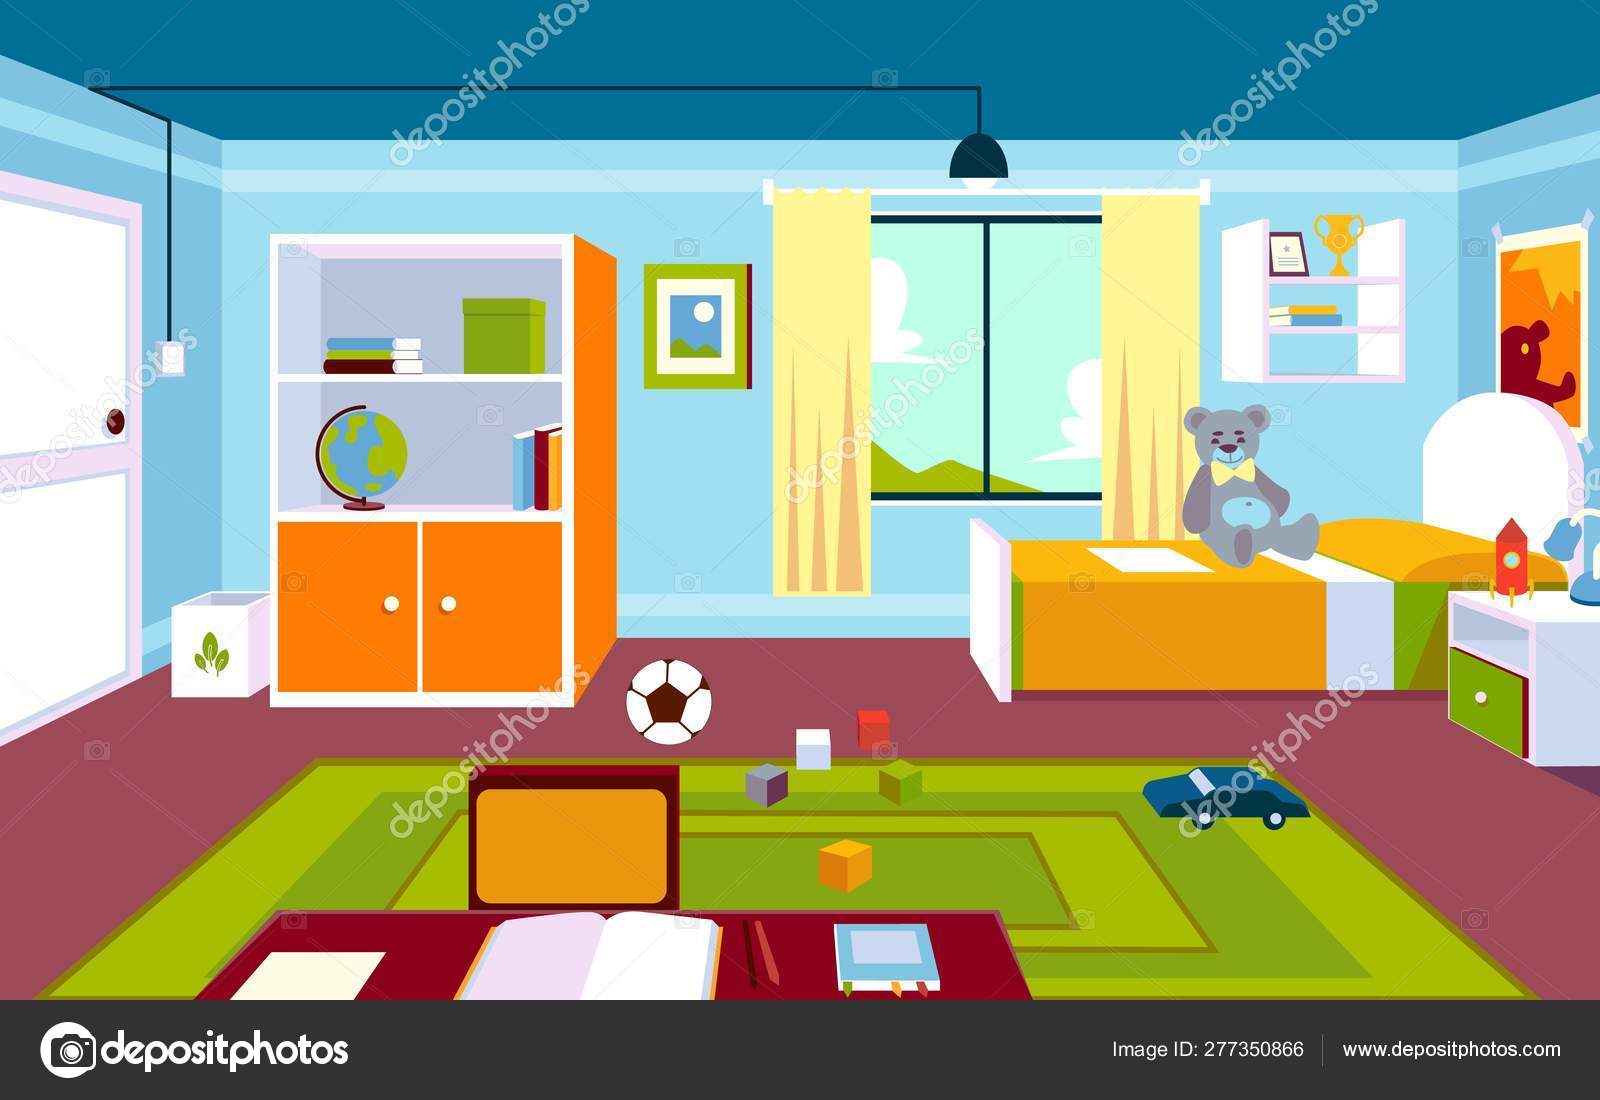 Interior of the kids room in the home in a cartoon style. Stock Vector ...